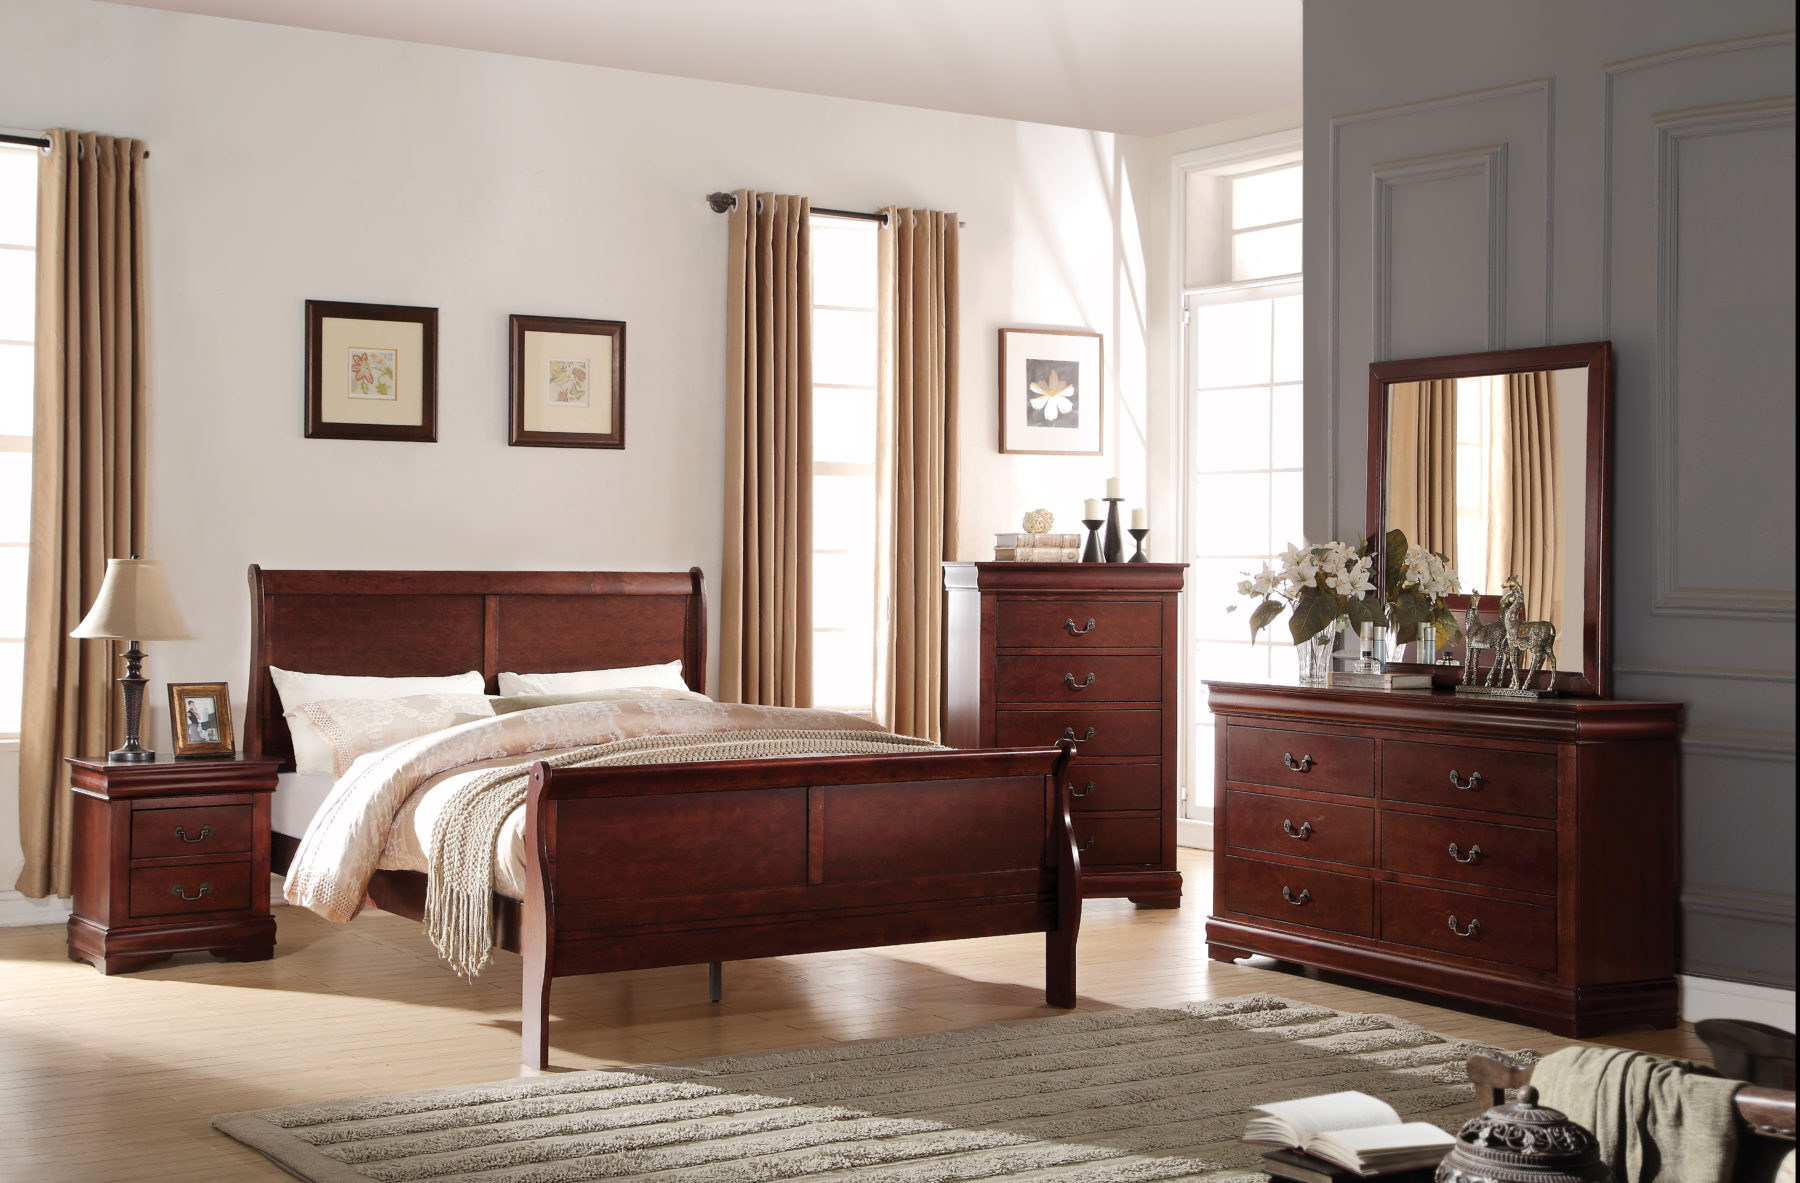 louis philippe style bedroom furniture